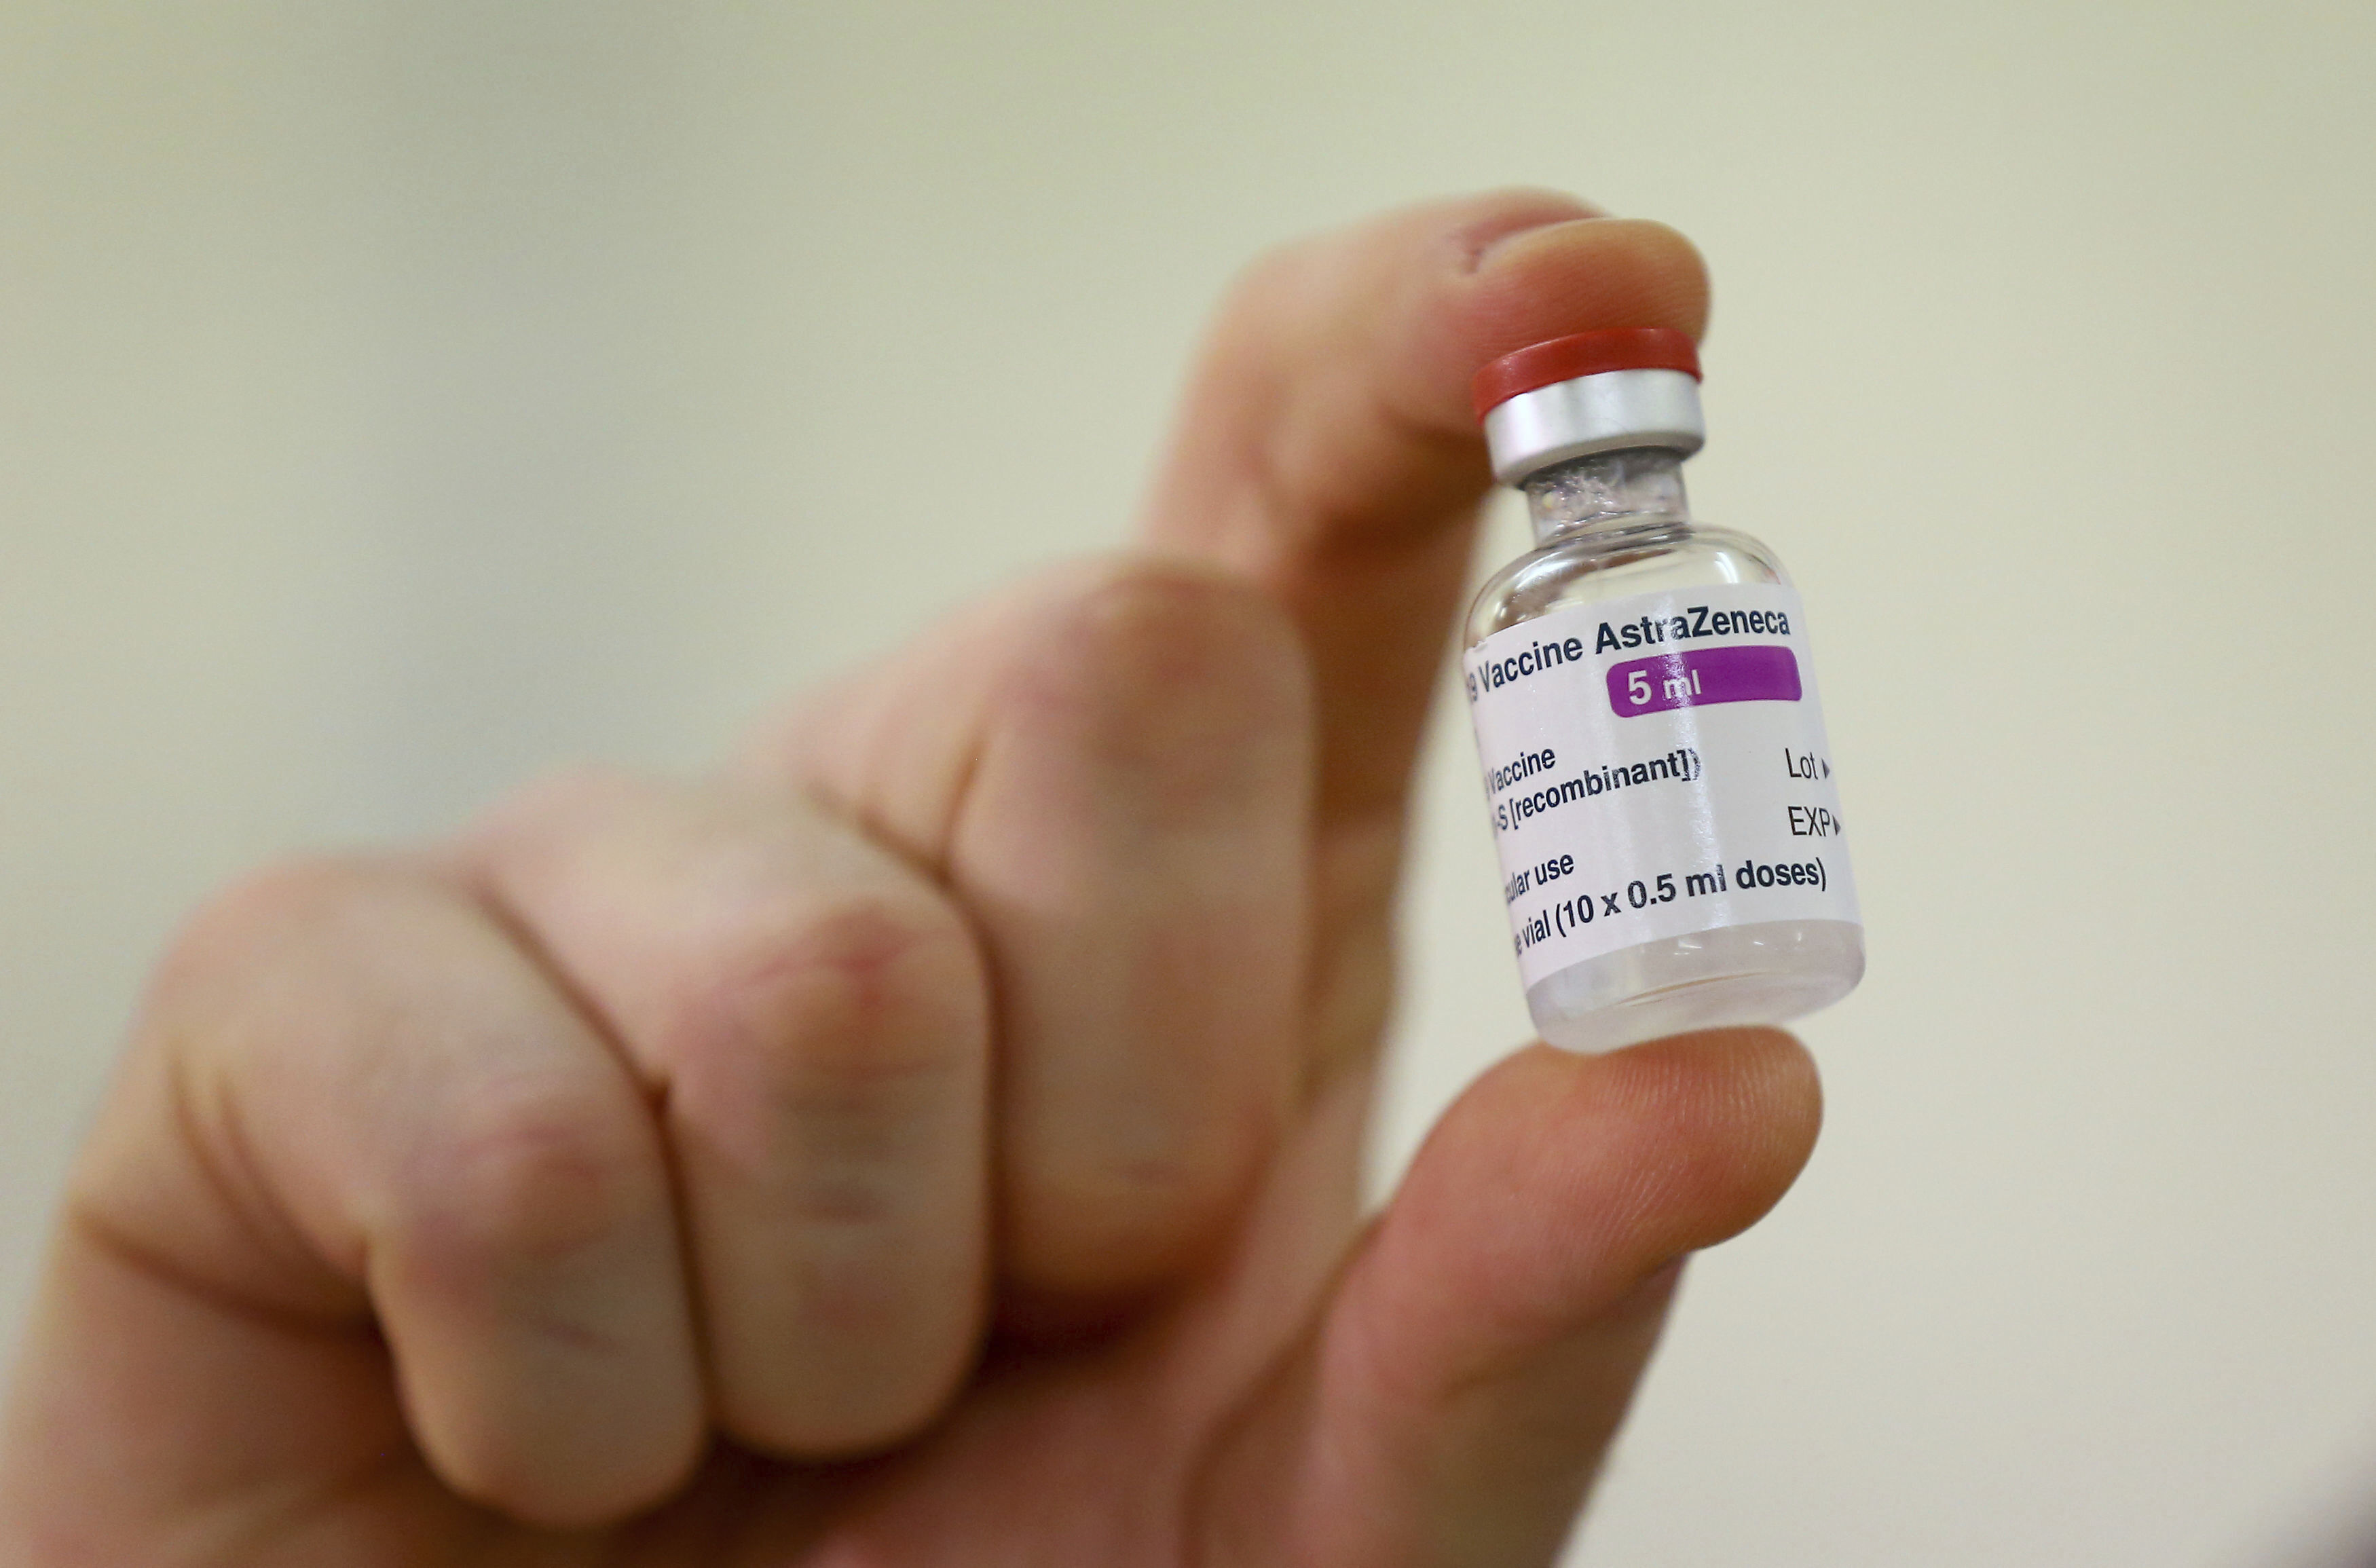 A vial of the COVID-19 vaccine developed by Oxford University and UK-based drugmaker AstraZeneca.